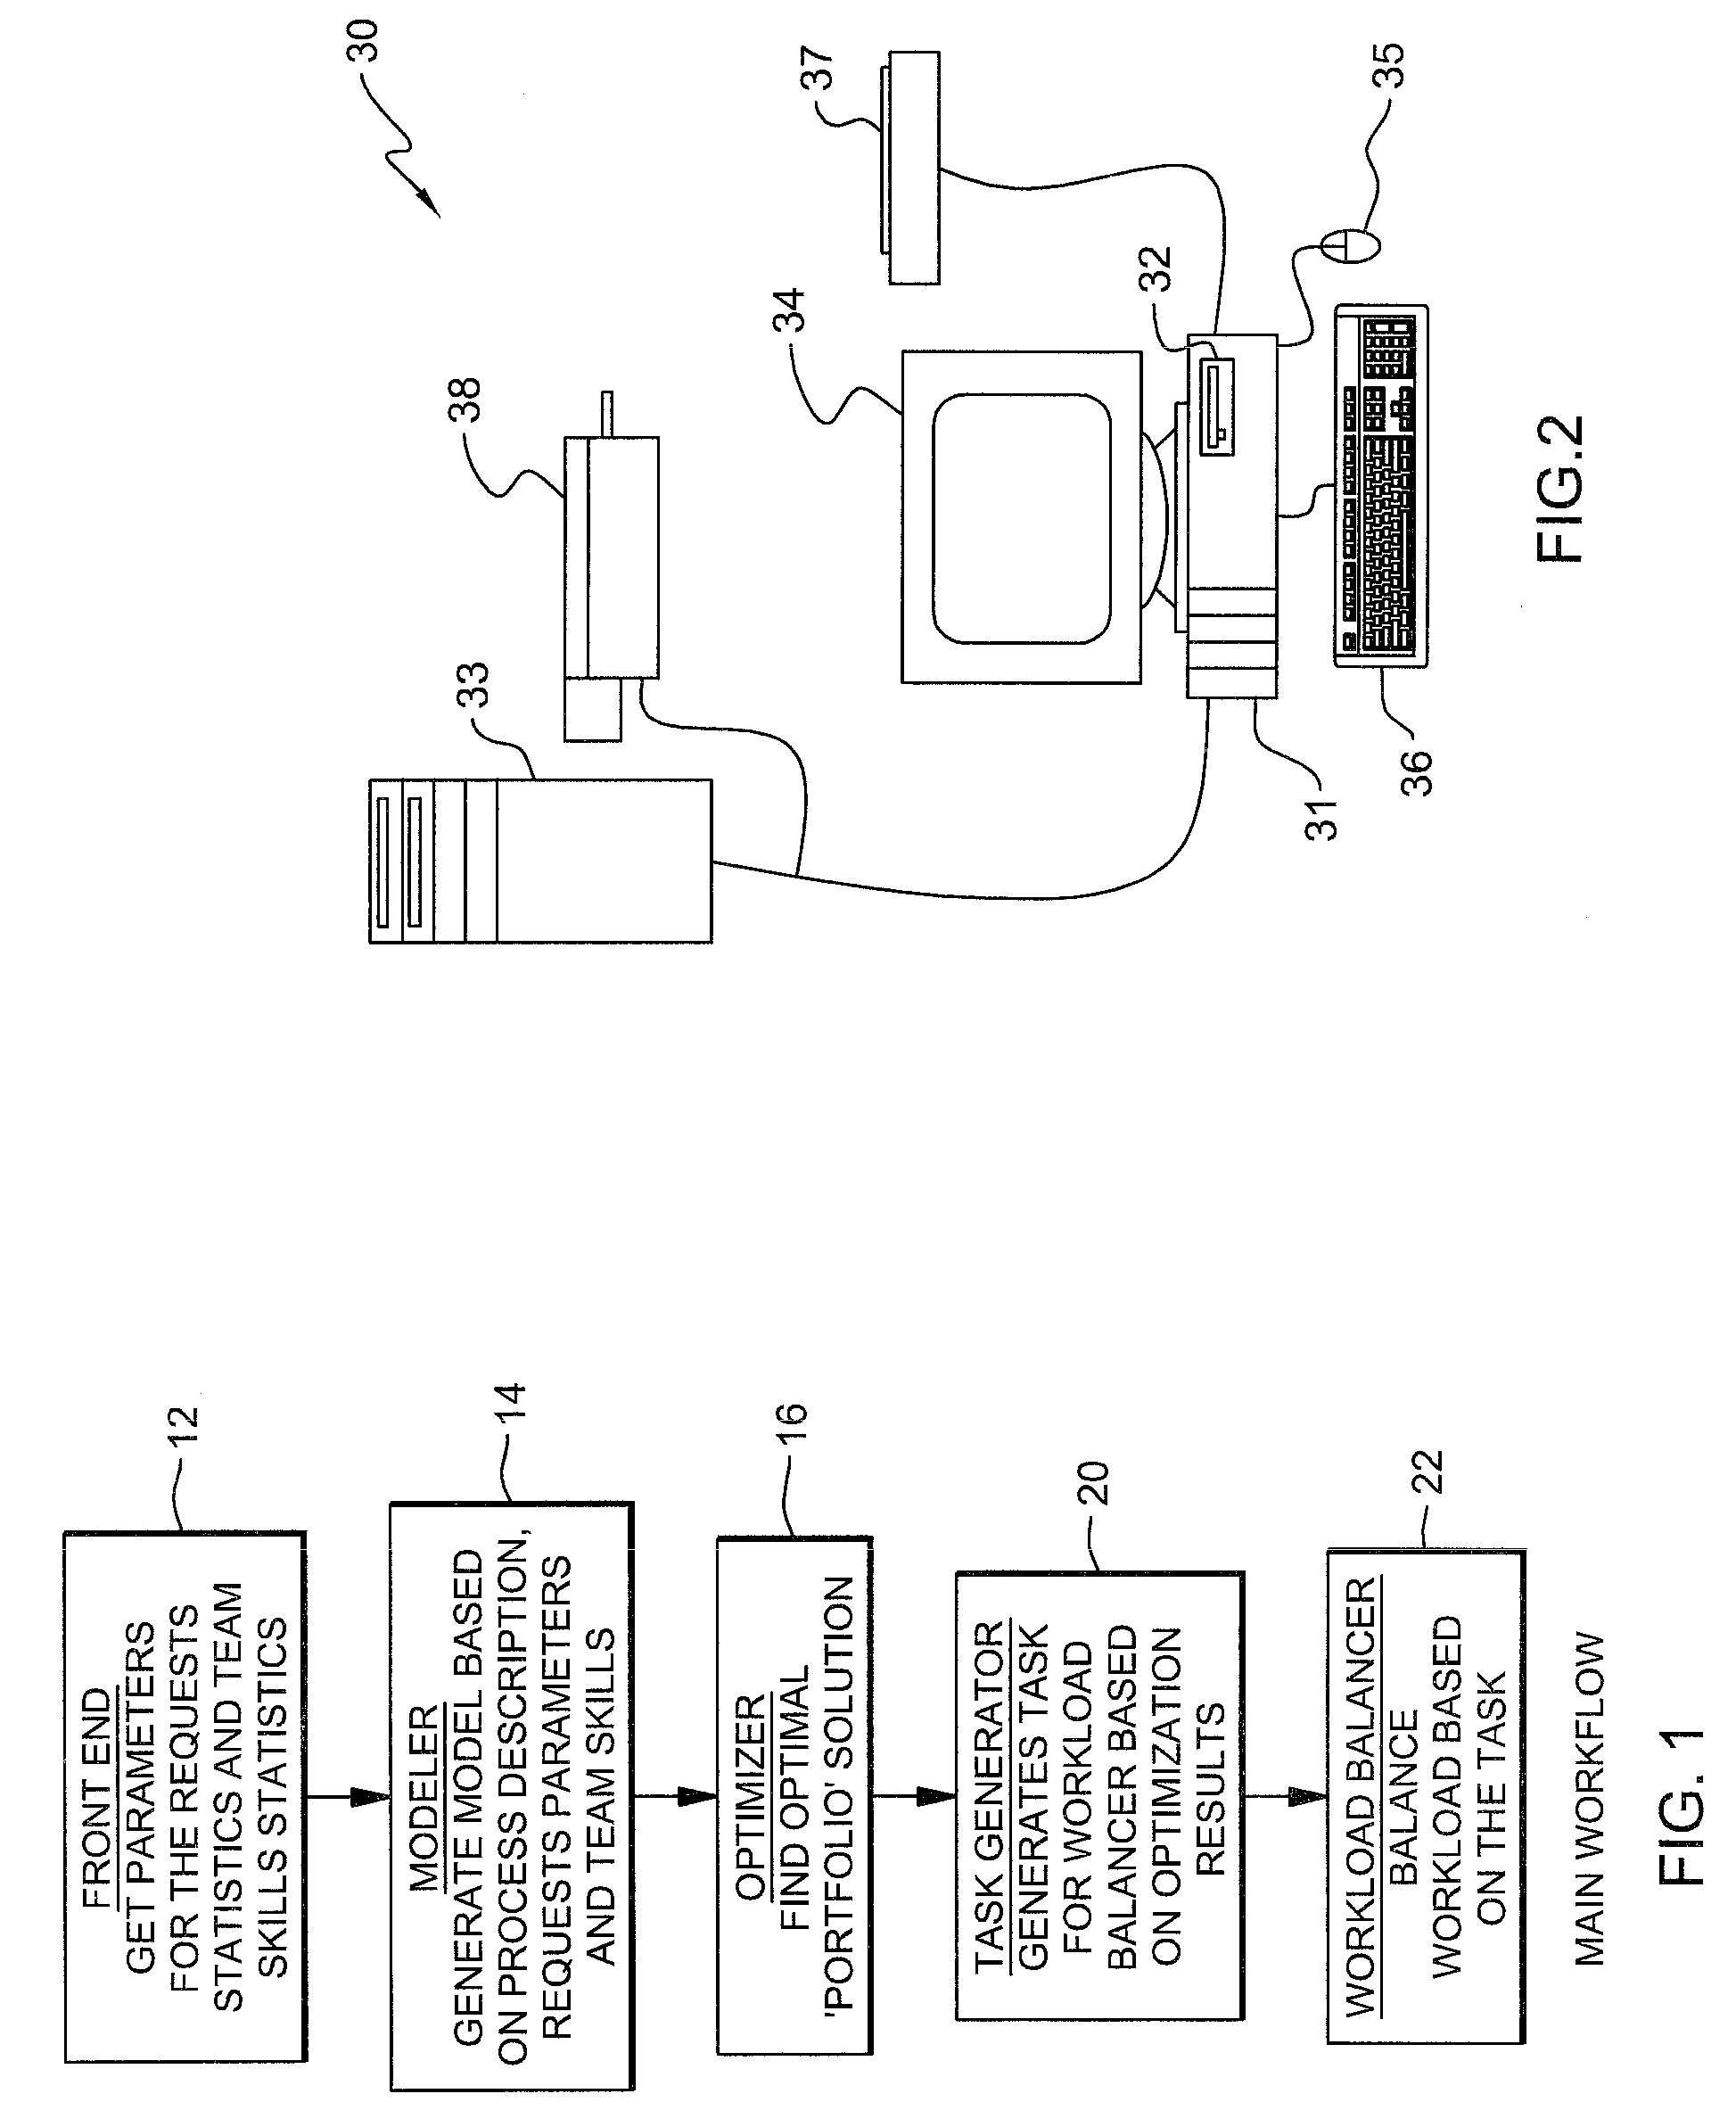 Method and system for routing service requests based on throughput of teams of servers